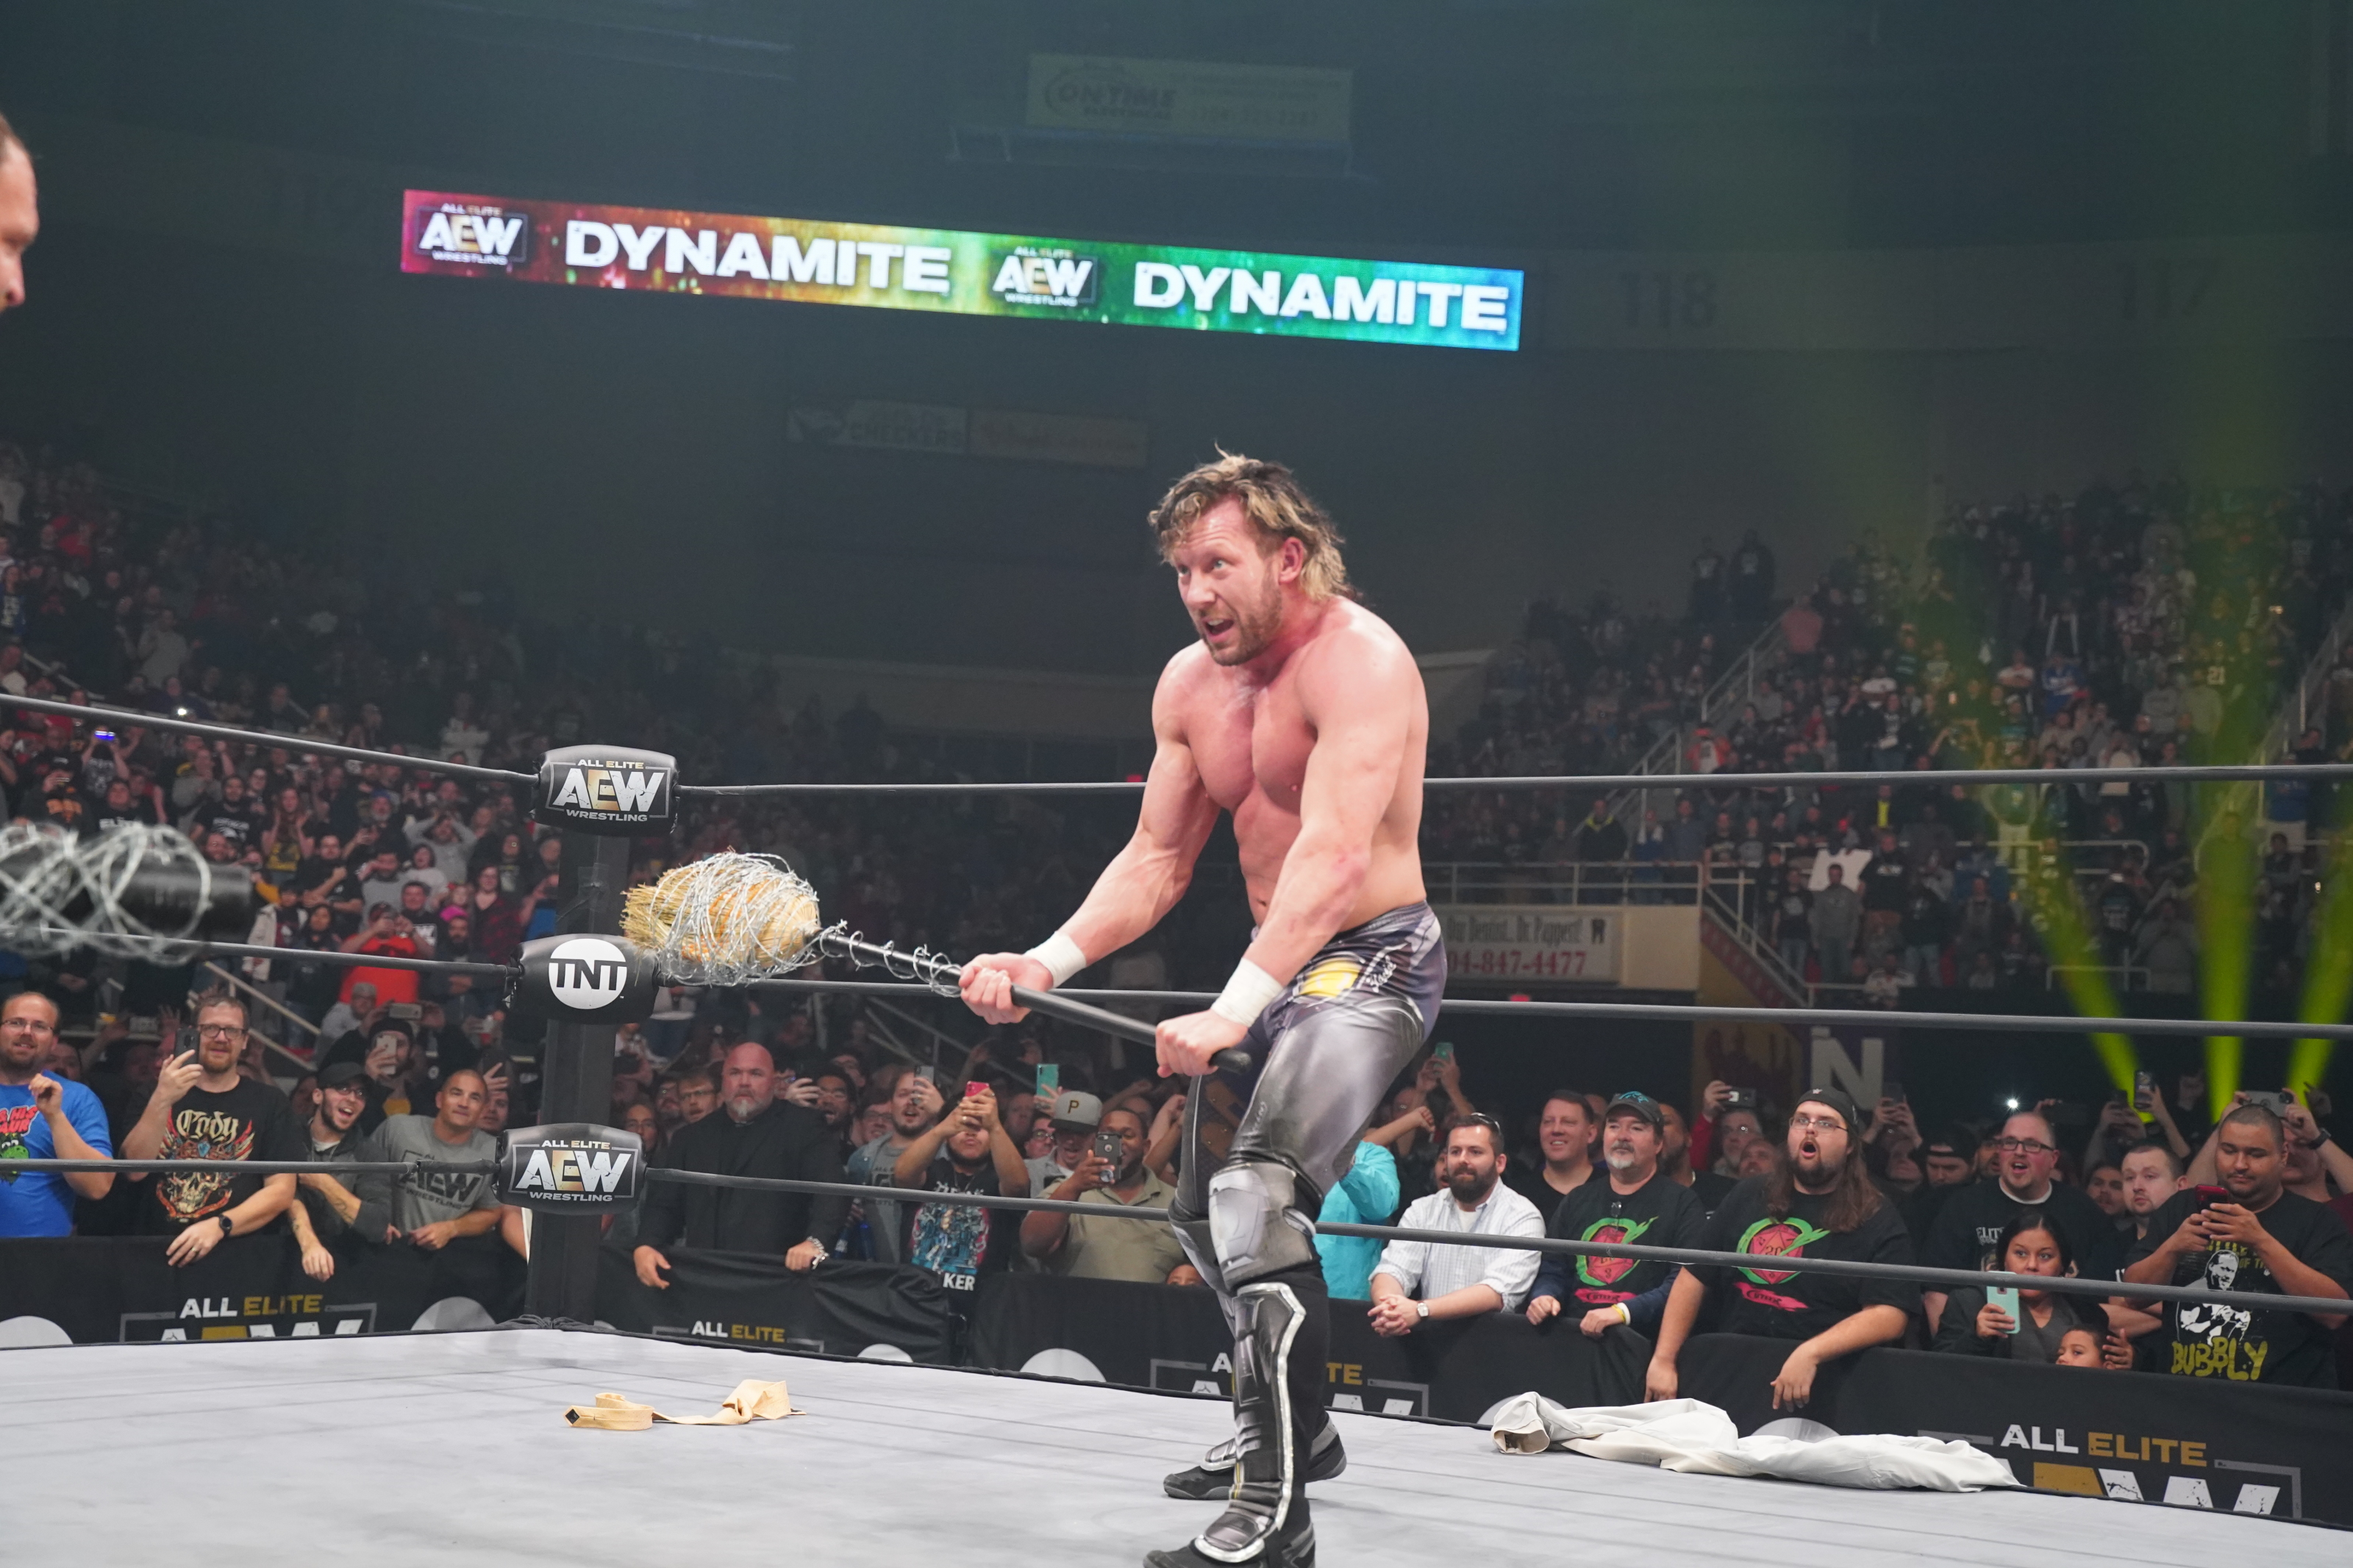 AEW Full Gear 2021 Results: Adam Page Beats Kenny Omega, Wins World Title